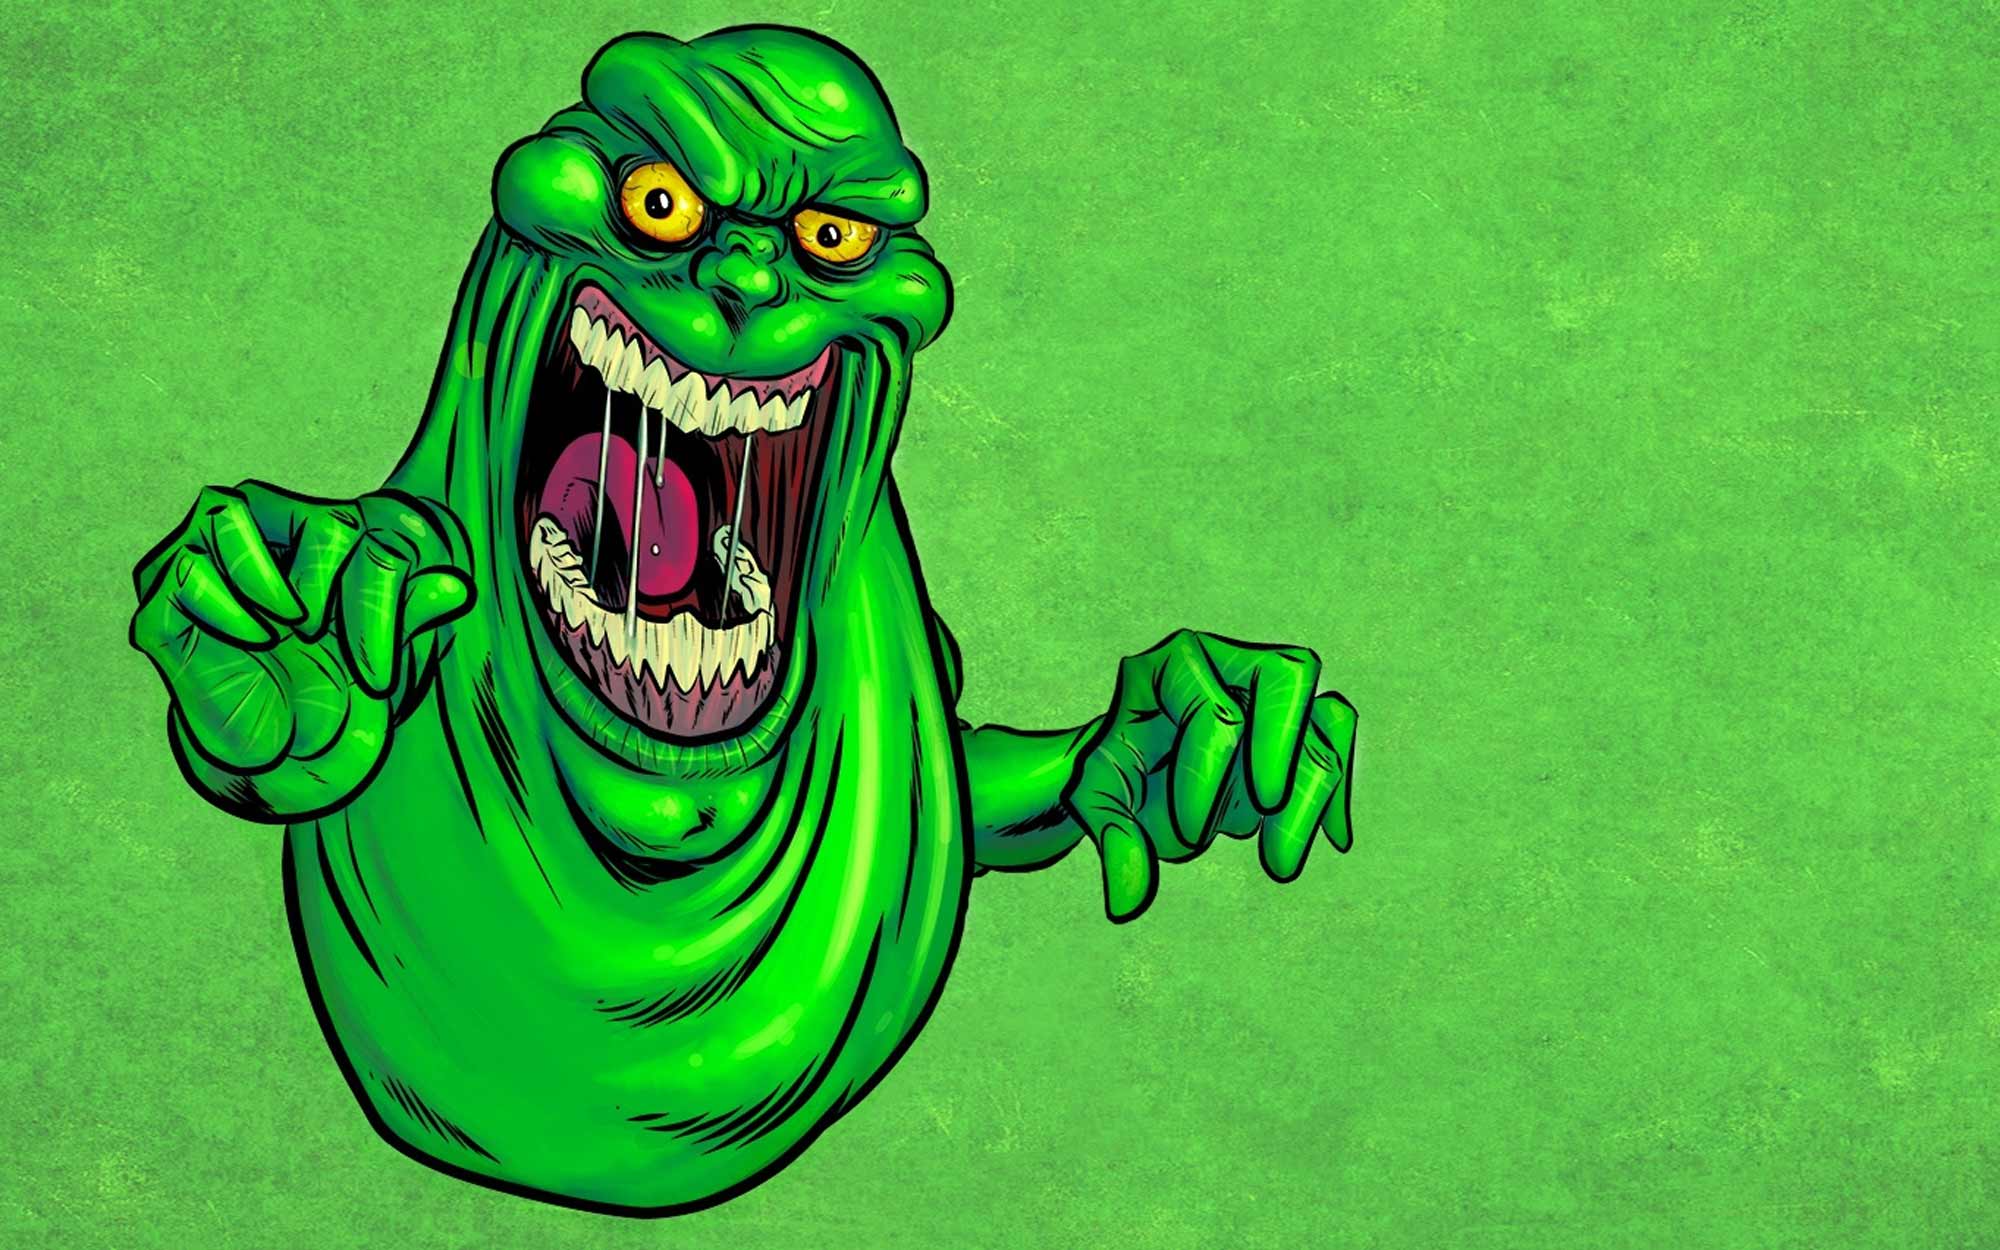 Ghostbusters is back with Slimer, the second of three 